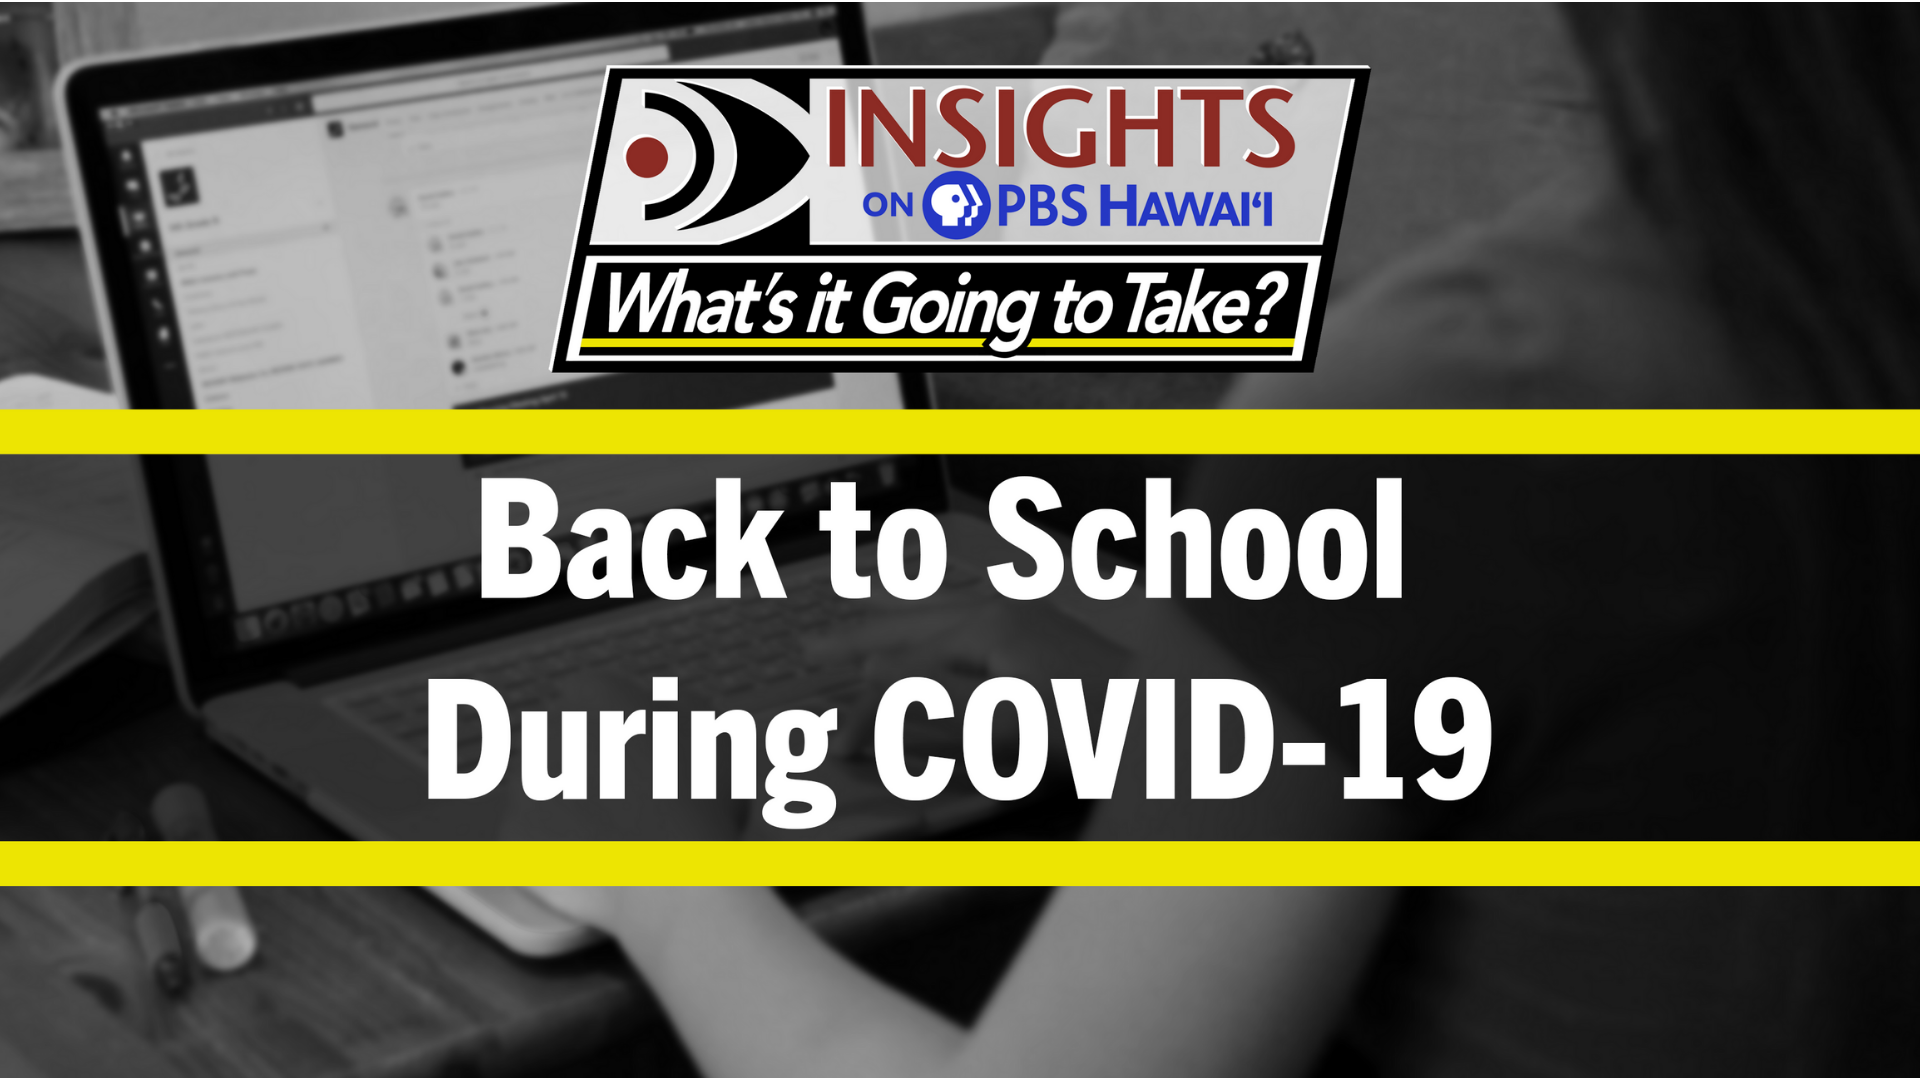 Back to School During COVID-19 <br/>What’s it Going to Take? <br/>INSIGHTS ON PBS HAWAIʻI